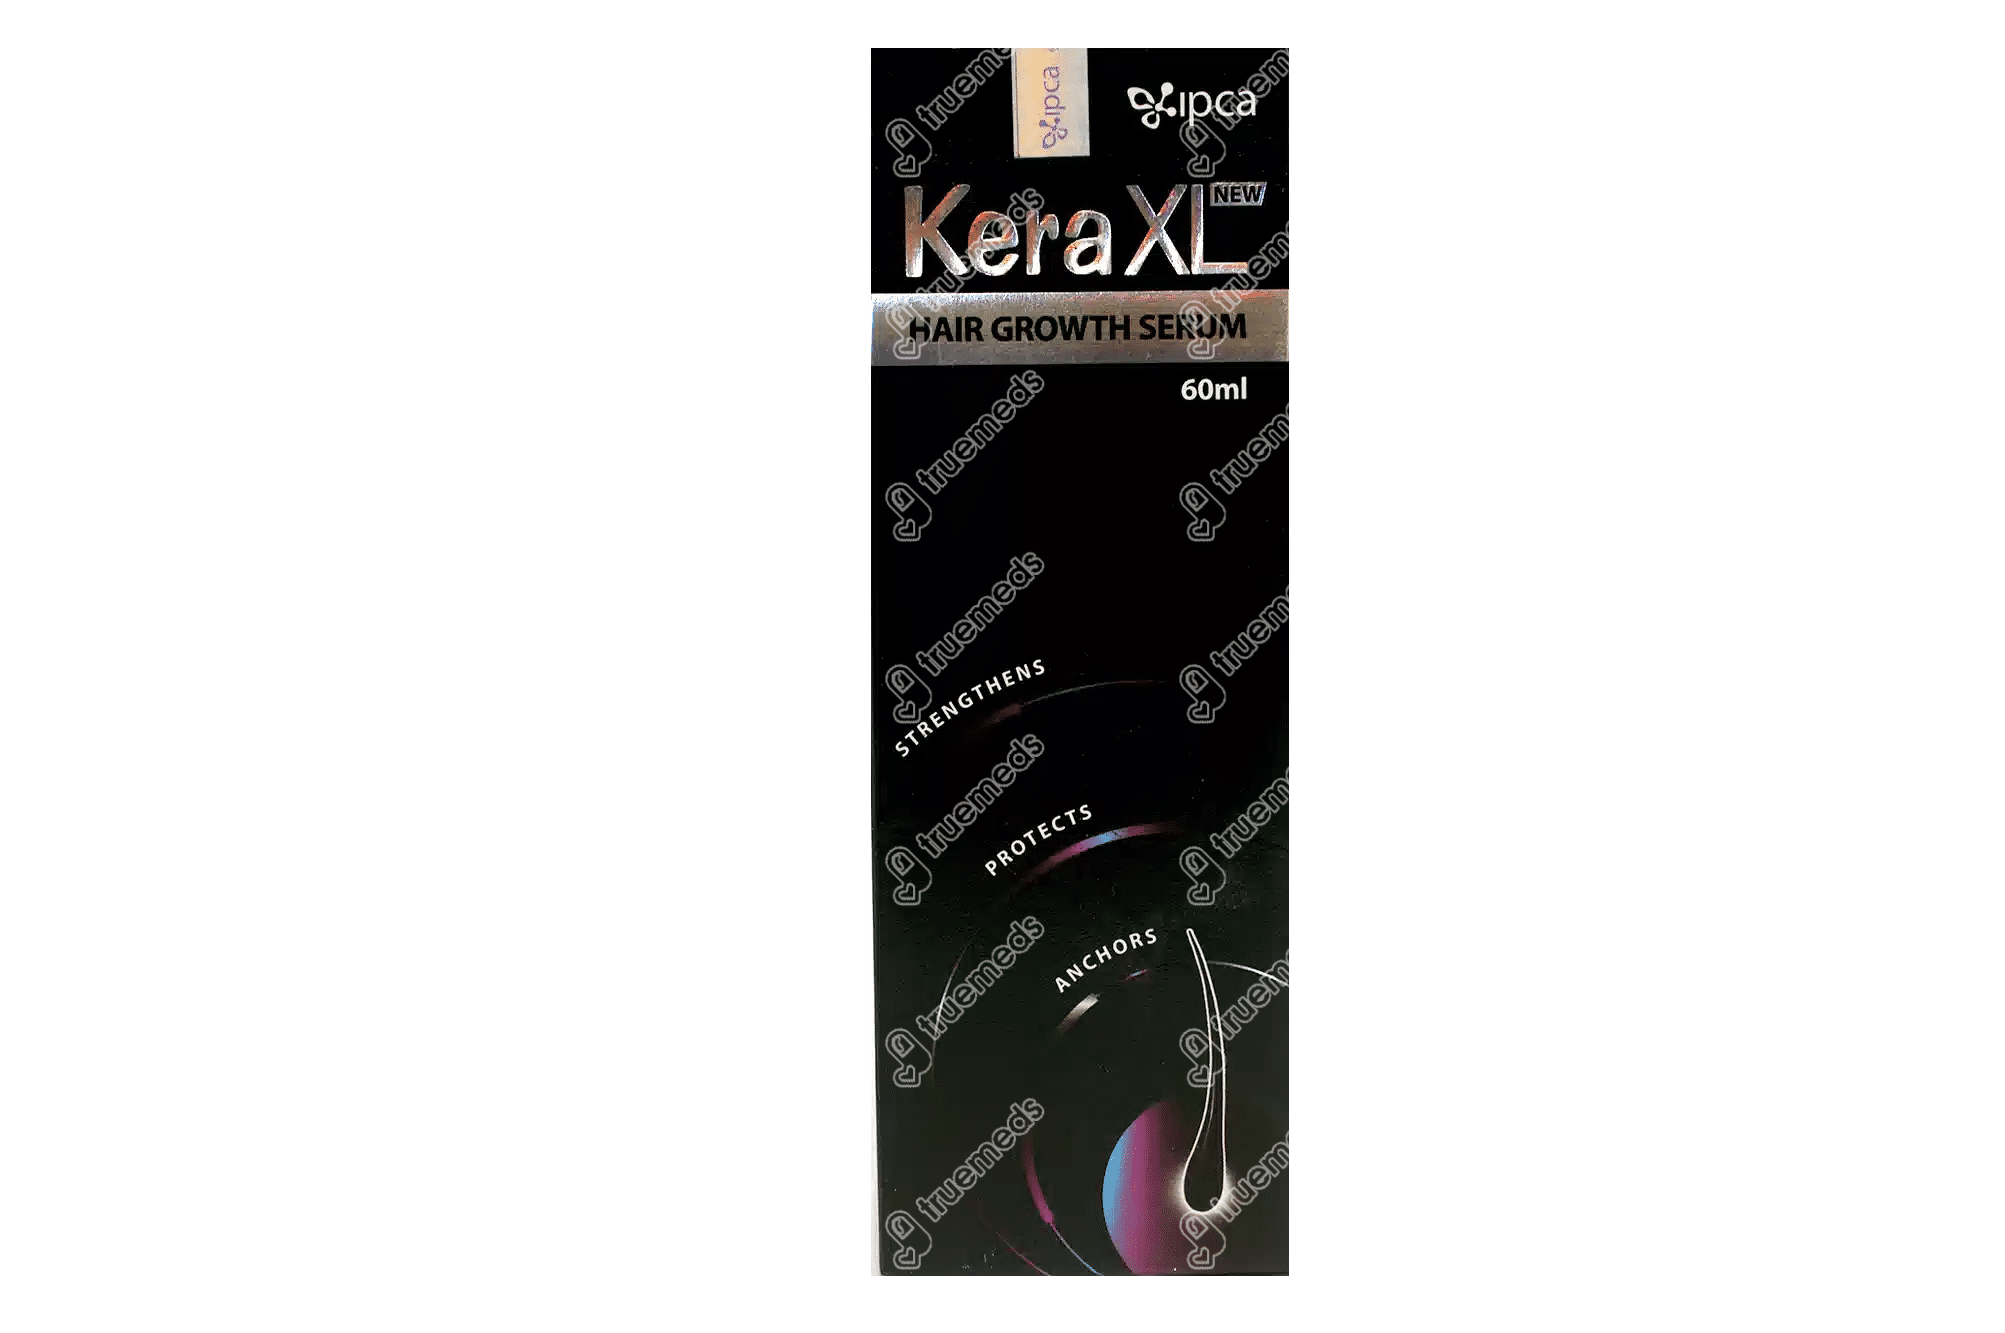 Kera Xl Hair Growth Serum Solution 60 ML - Uses, Side Effects, Dosage,  Price | Truemeds